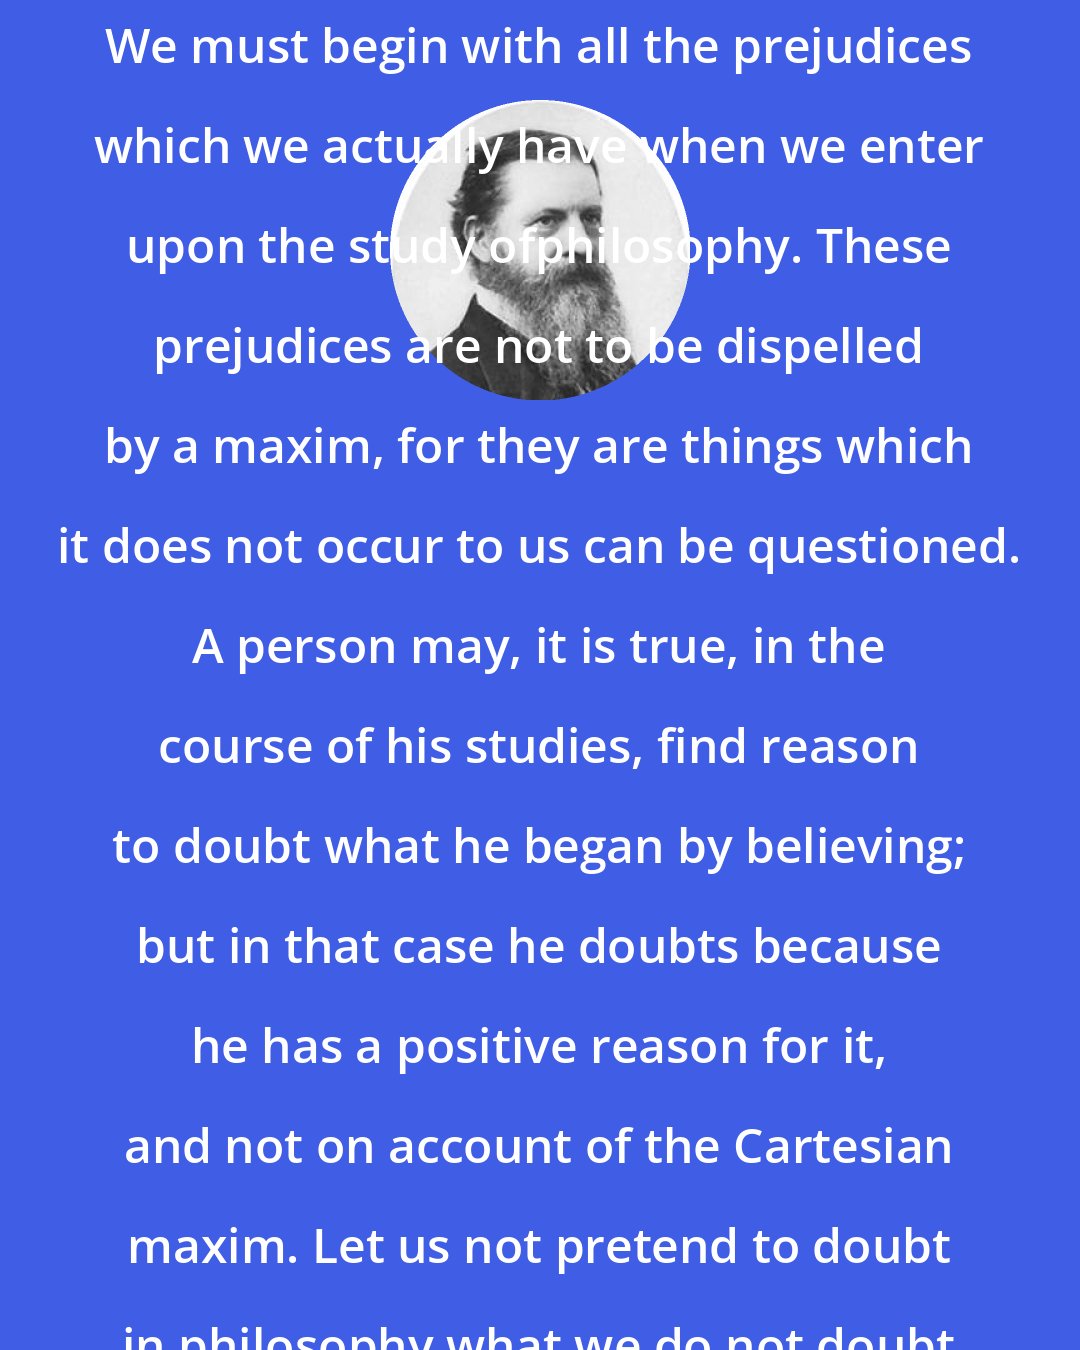 Charles Sanders Peirce: We cannot begin with complete doubt. We must begin with all the prejudices which we actually have when we enter upon the study ofphilosophy. These prejudices are not to be dispelled by a maxim, for they are things which it does not occur to us can be questioned. A person may, it is true, in the course of his studies, find reason to doubt what he began by believing; but in that case he doubts because he has a positive reason for it, and not on account of the Cartesian maxim. Let us not pretend to doubt in philosophy what we do not doubt in our hearts.